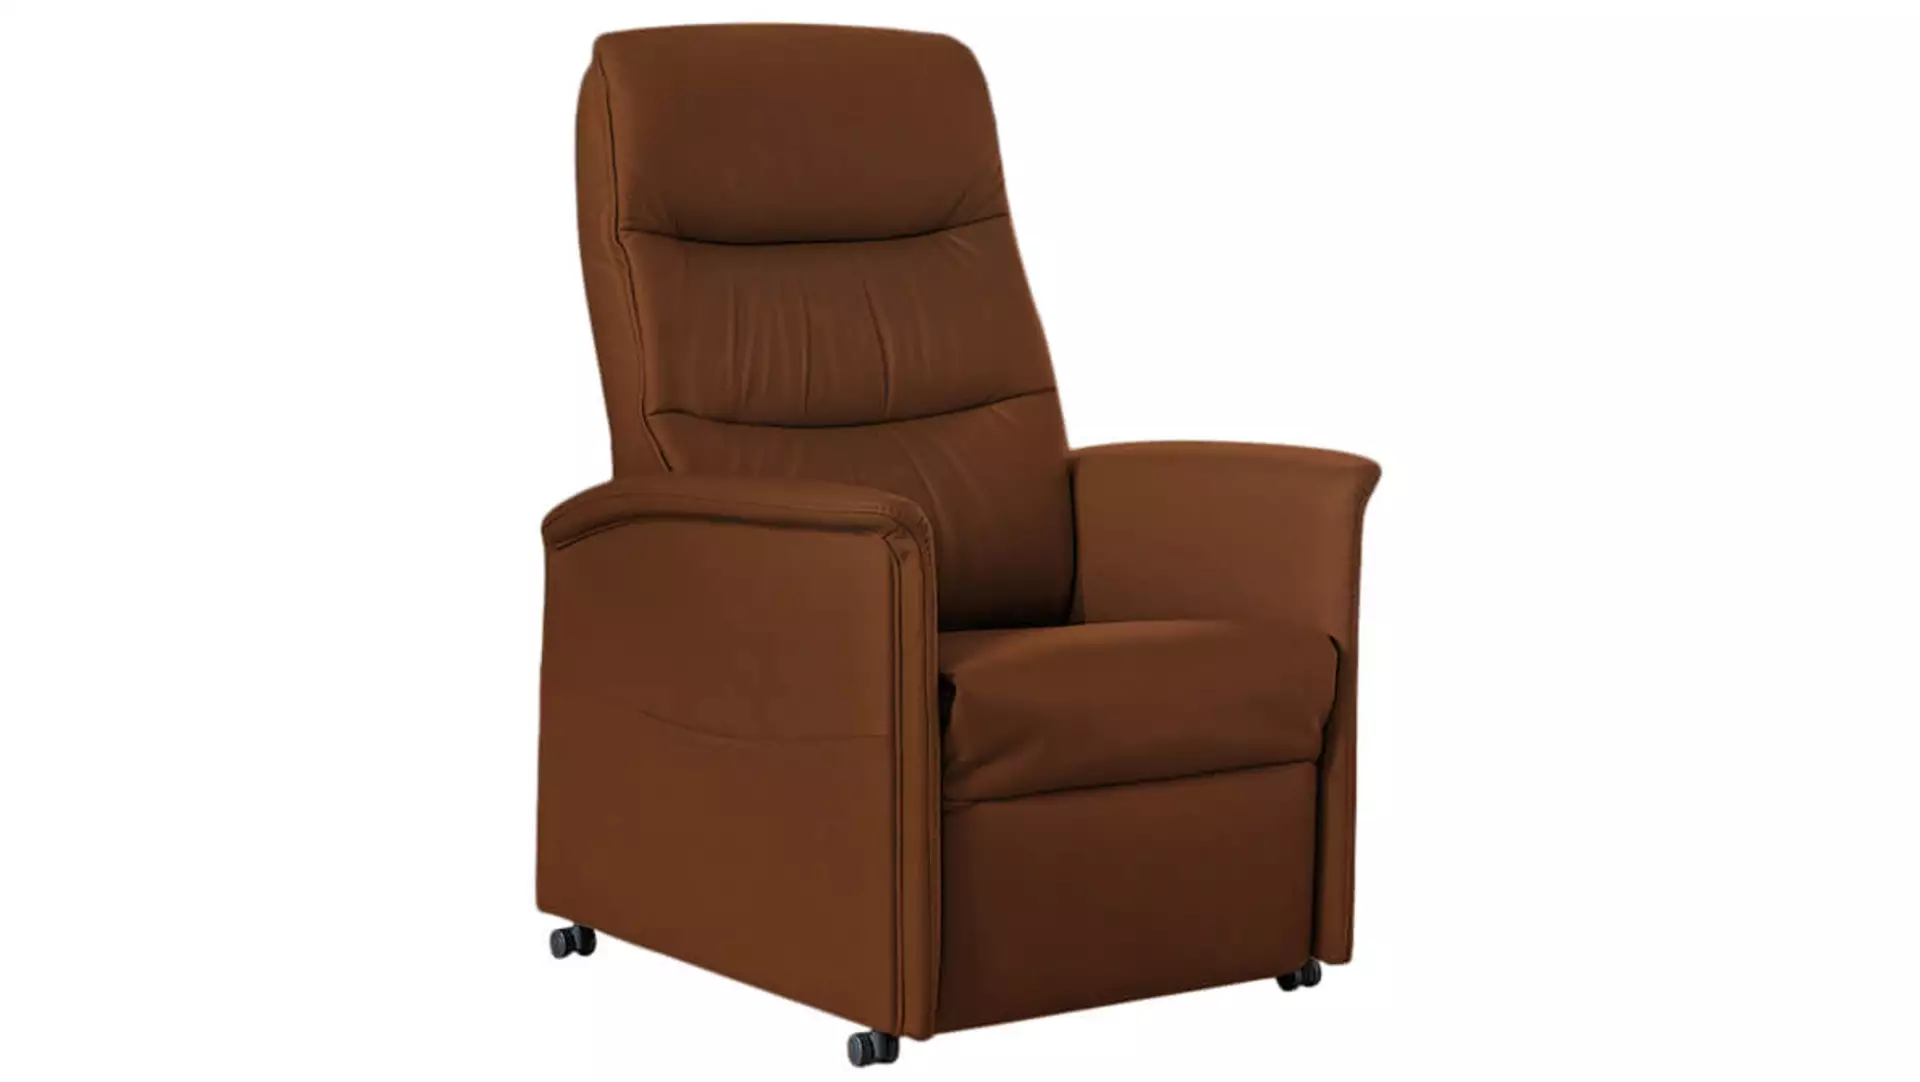 Relaxer Toulouse Basic Himolla / Farbe: Kaffee / Material: Stoff Basic